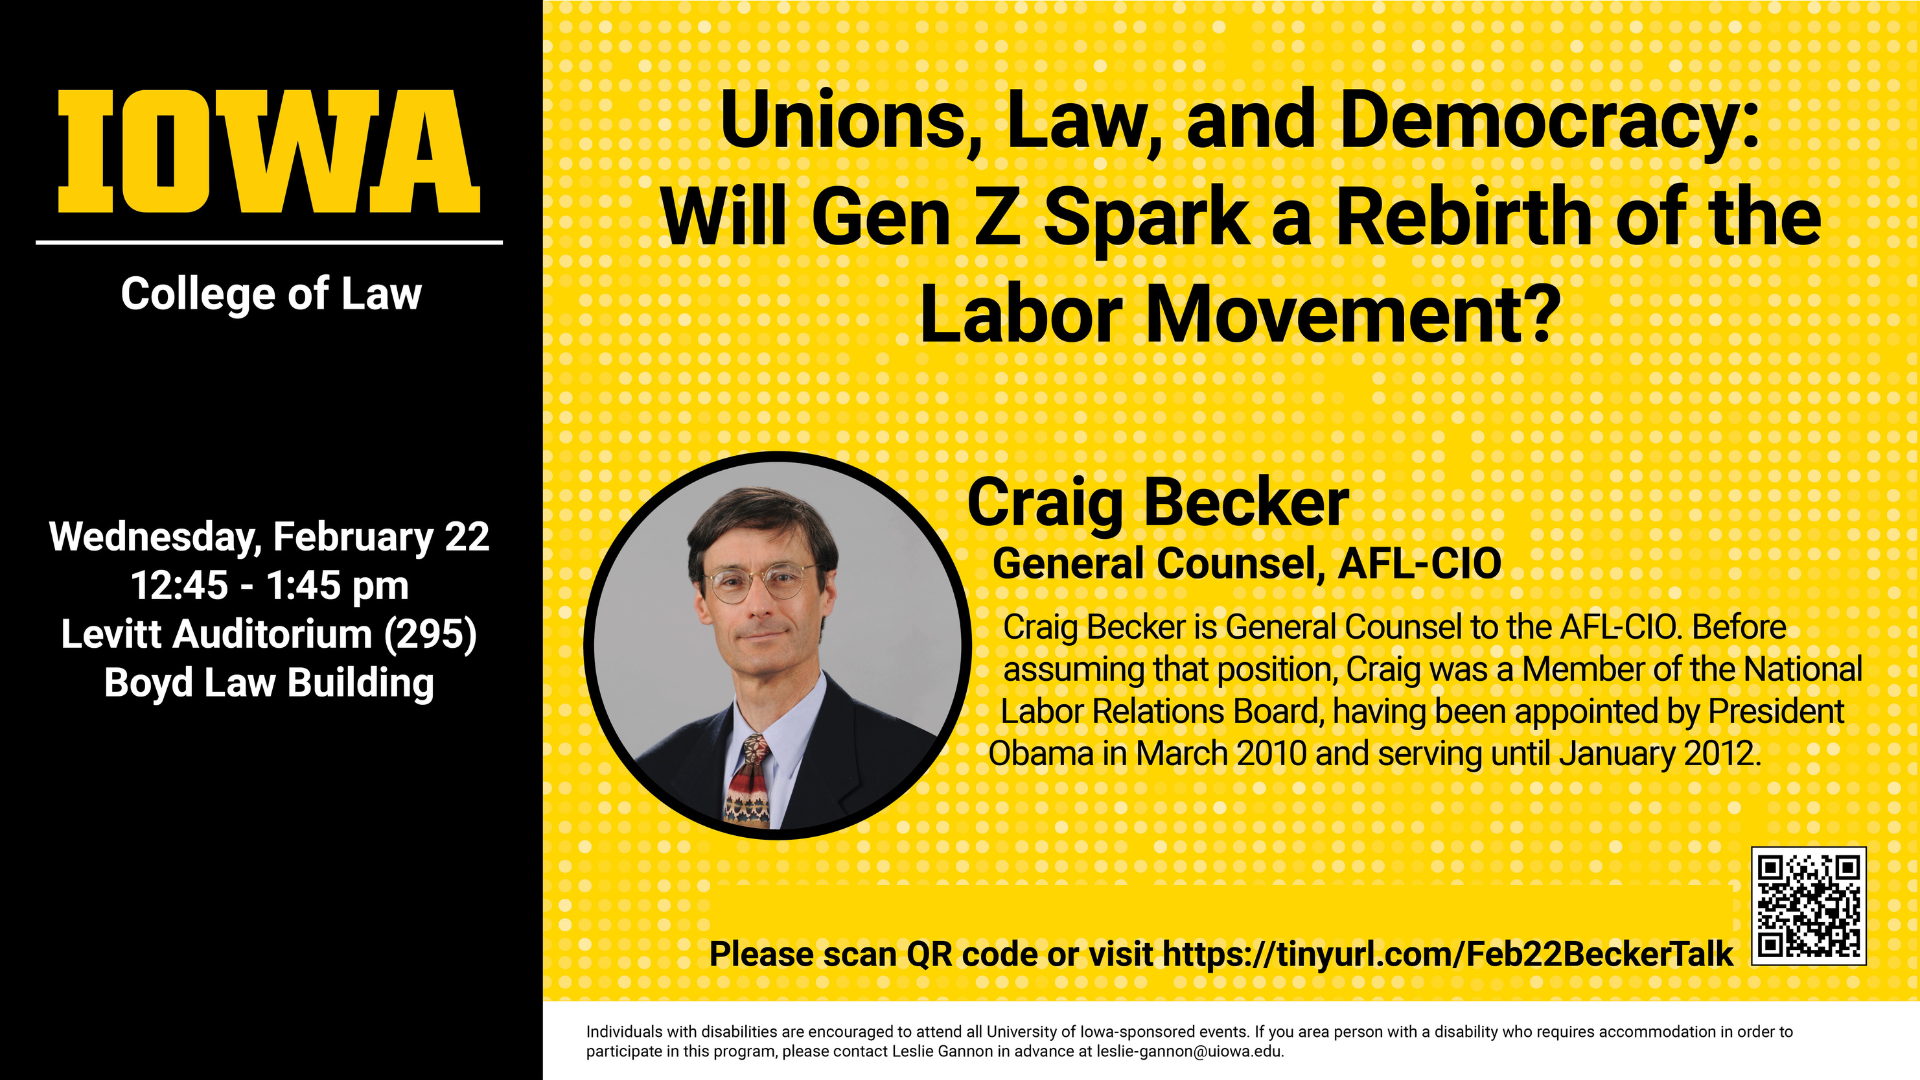 Union, Law, and Democracy: Will Gen Z spark a rebirth of the labor movement? Craig Becker, General Counsel, AFL-CIO. Craig Becker is General Counsel to the AFL-CIO. Before assuming that position, Craig was a member of the National Labor Relations Board, having been appointed by President Obama in March 2010 and serving until January 2012. Wednesday, February 22. 12:45 PM to 1:45 PM. Levitt Auditorium (BLB 295). Boyd Law Building. https://tinyurl.com/Feb22BeckerTalk